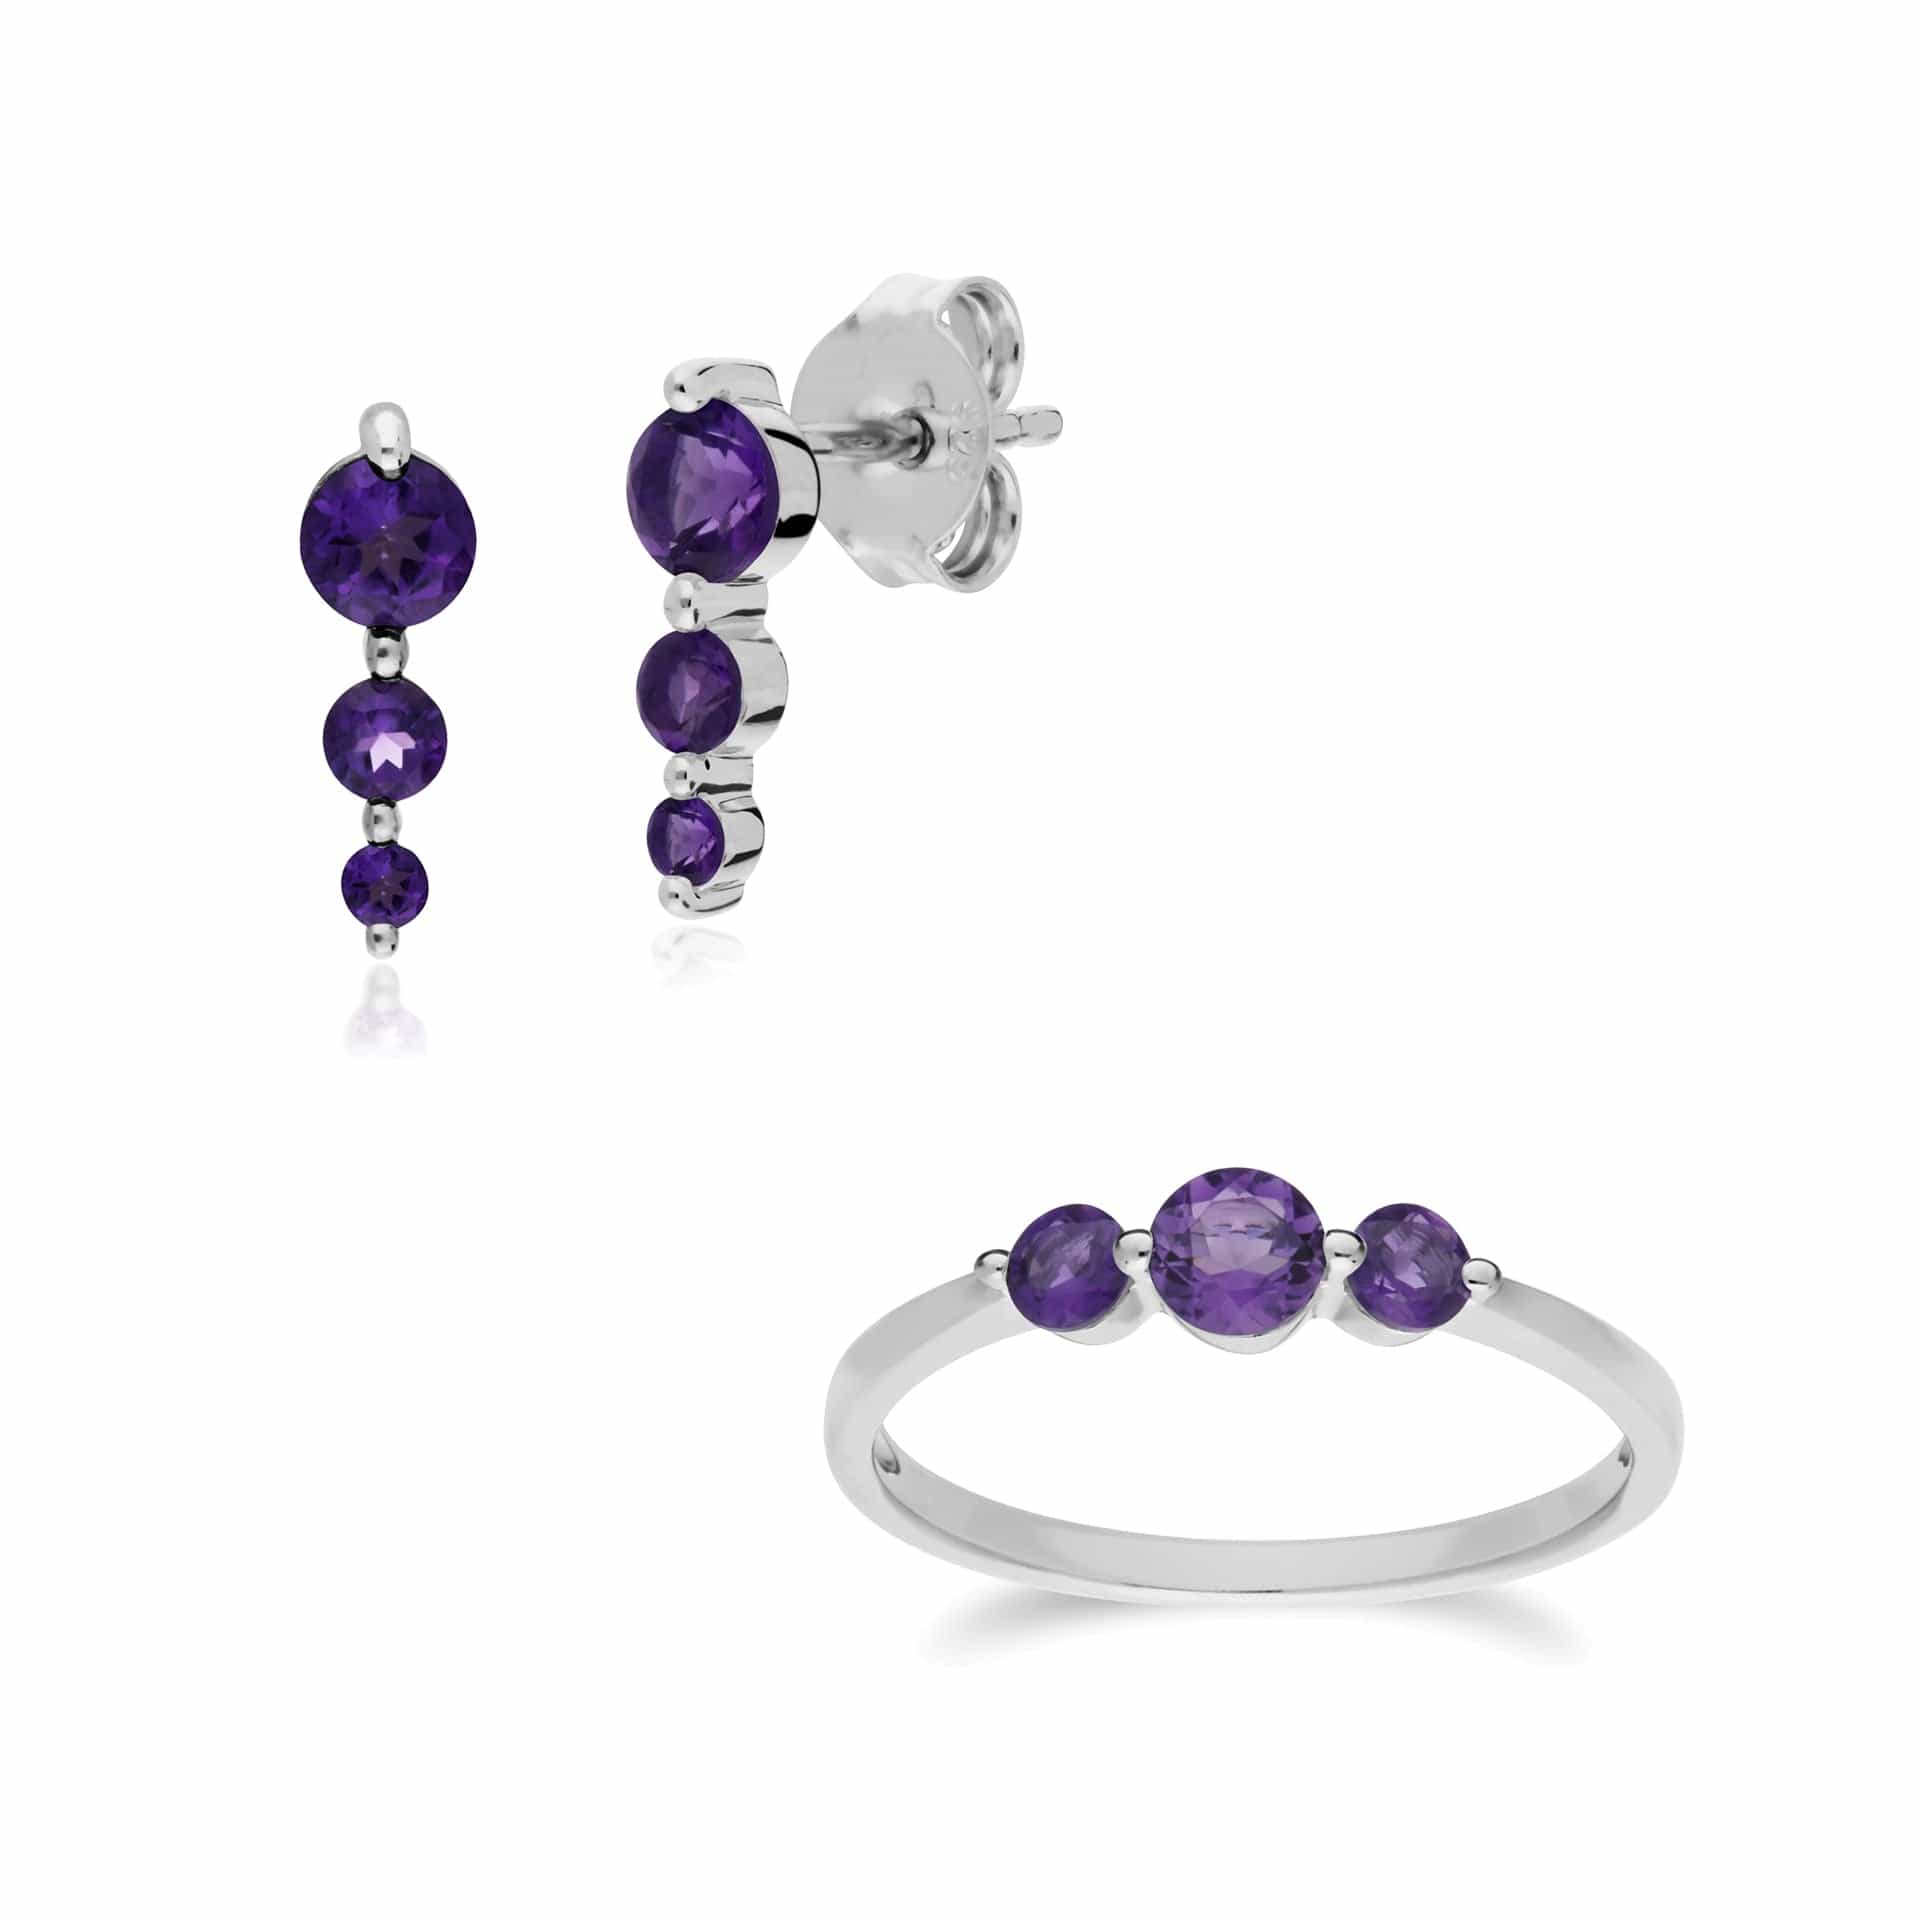 270E025503925-270R056003925 Classic Round Amethyst Three Stone Gradient Earrings & Ring Set in 925 Sterling Silver 1